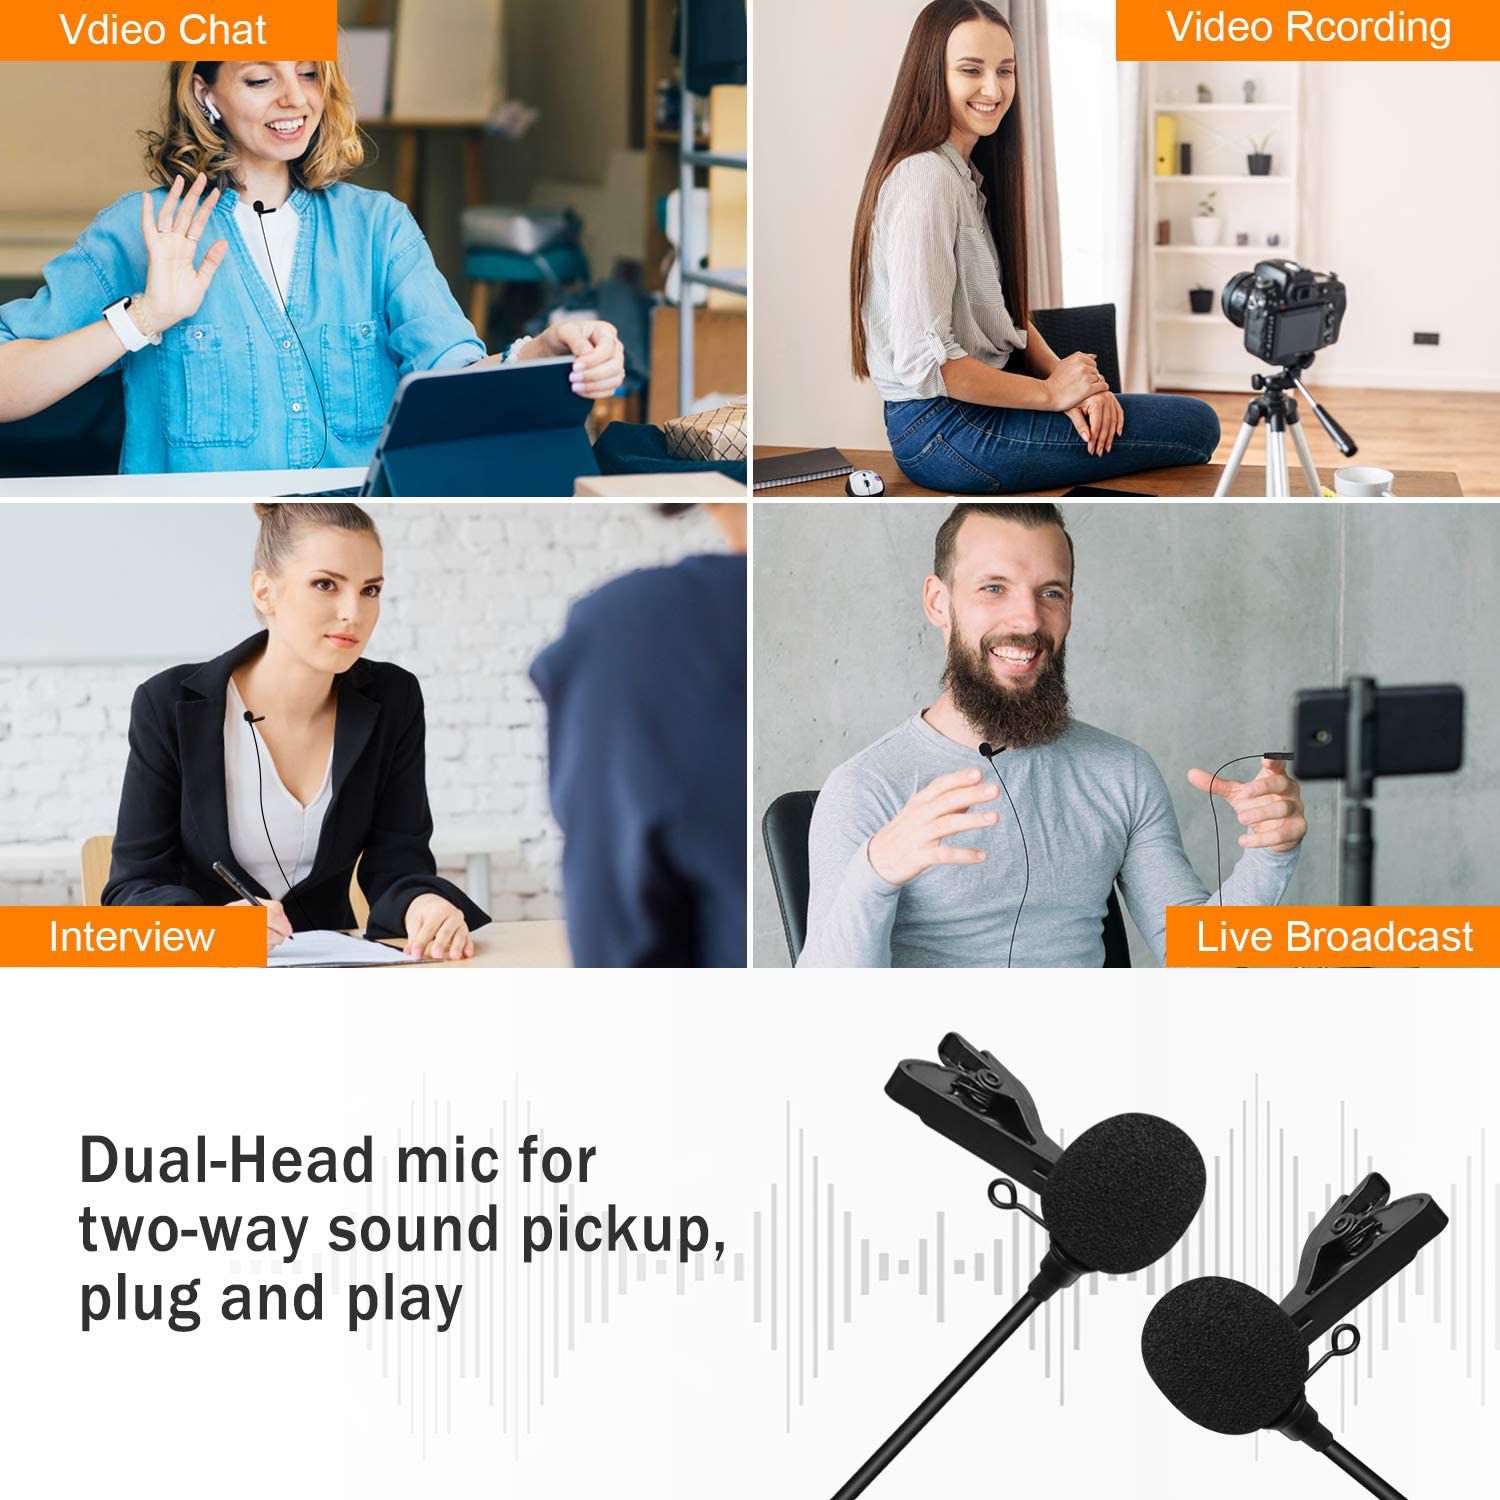 CVM-D02 Dual Lavalier Microphone Portable Clip on Mic for Phones Camera Video Recording Online Meeting Vlogging Streaming